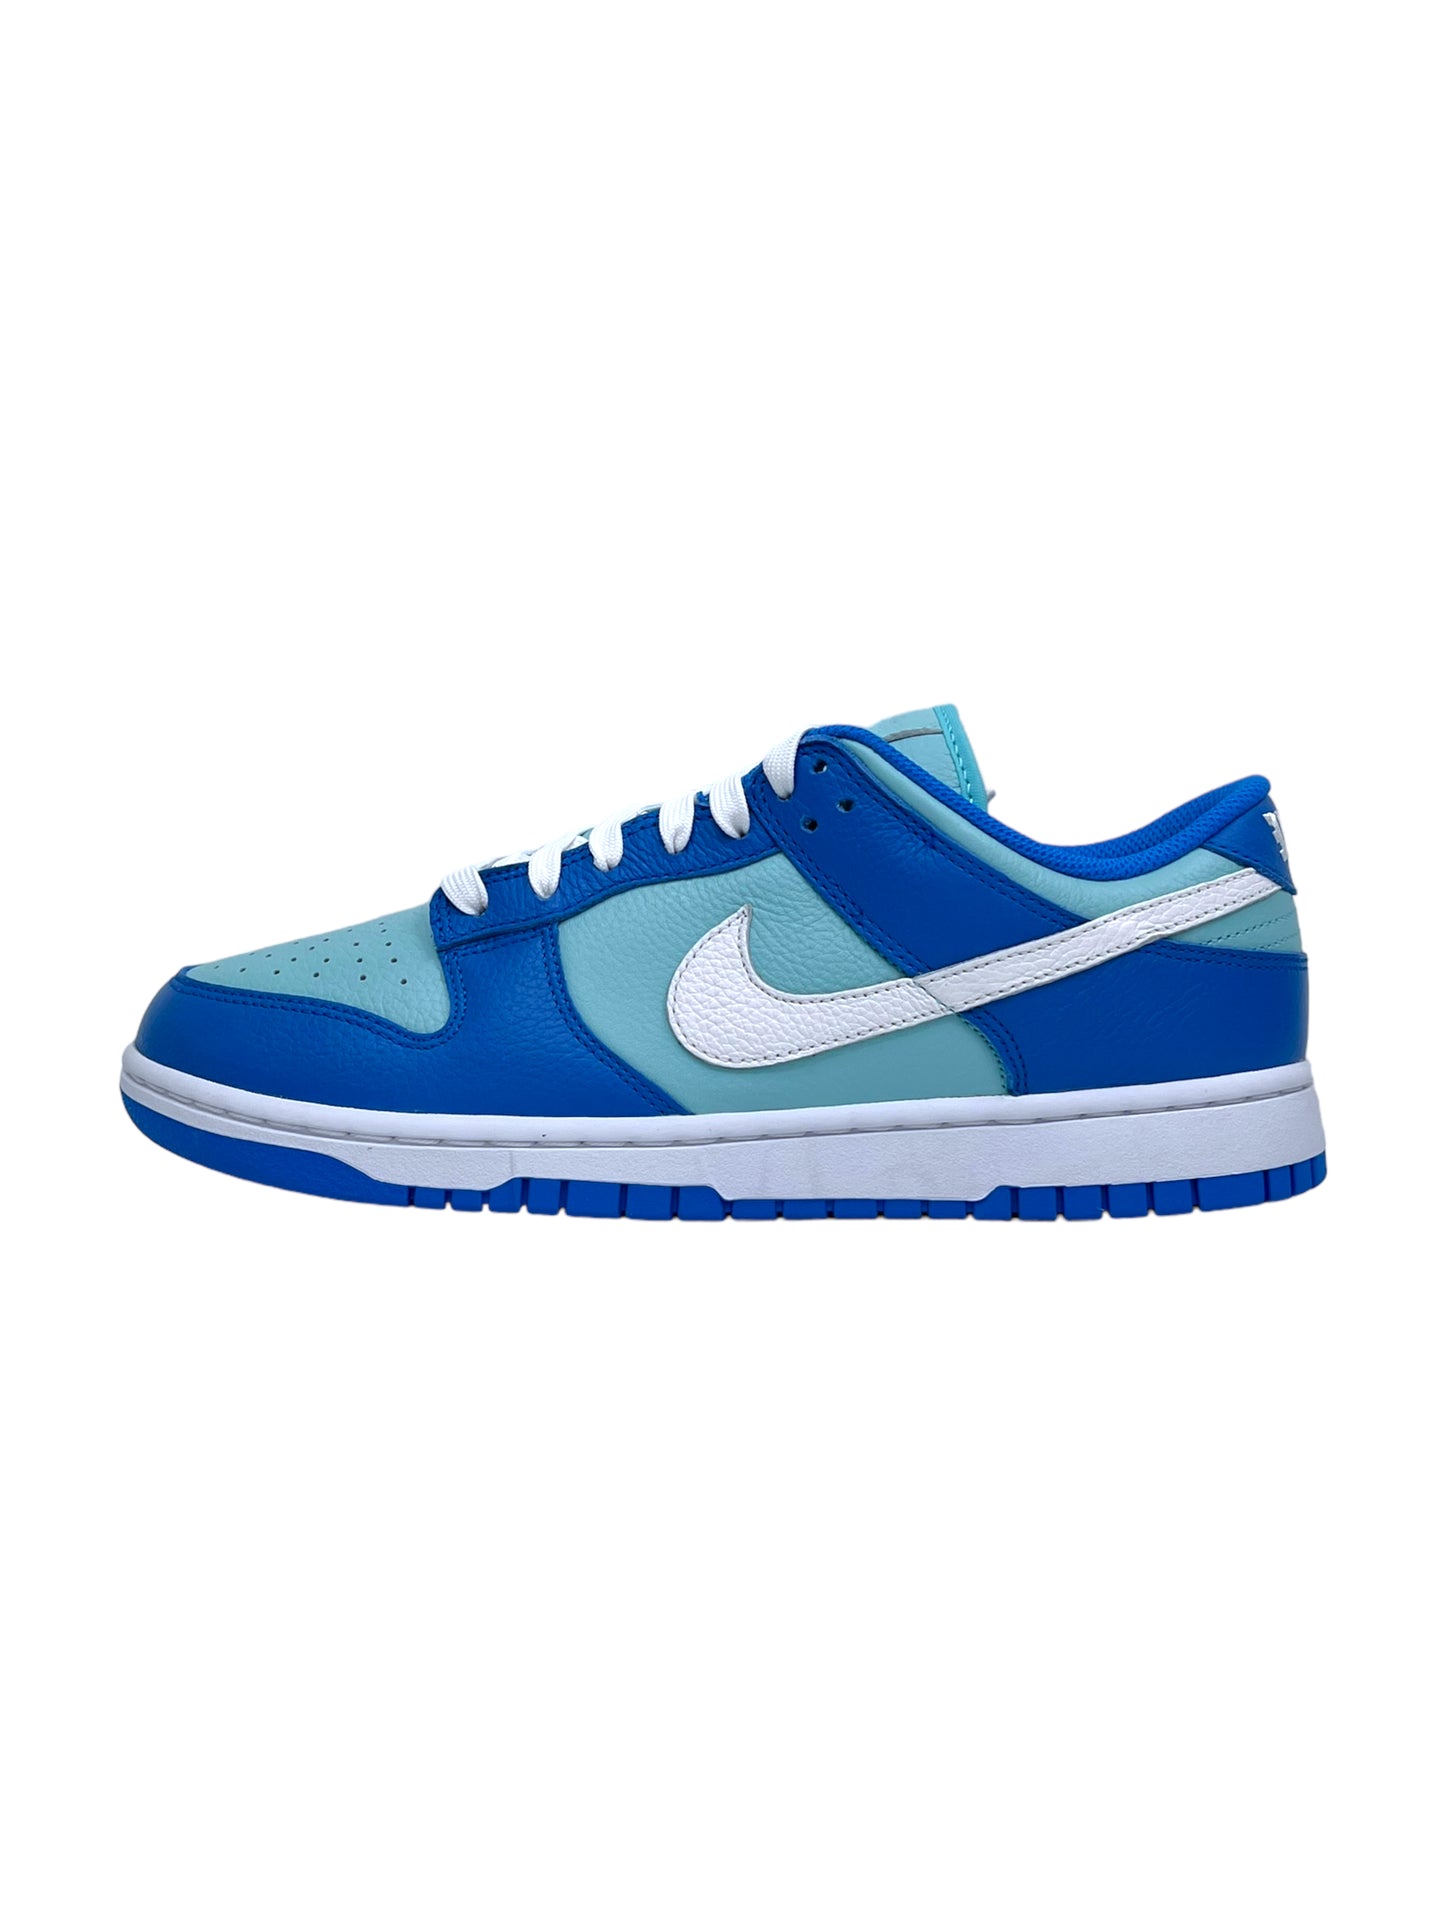 Nike Dunk Low PRM ‘Pacific Ocean’ Sneakers - Genuine Design Luxury Consignment for Men. New & Pre-Owned Clothing, Shoes, & Accessories. Calgary, Canada